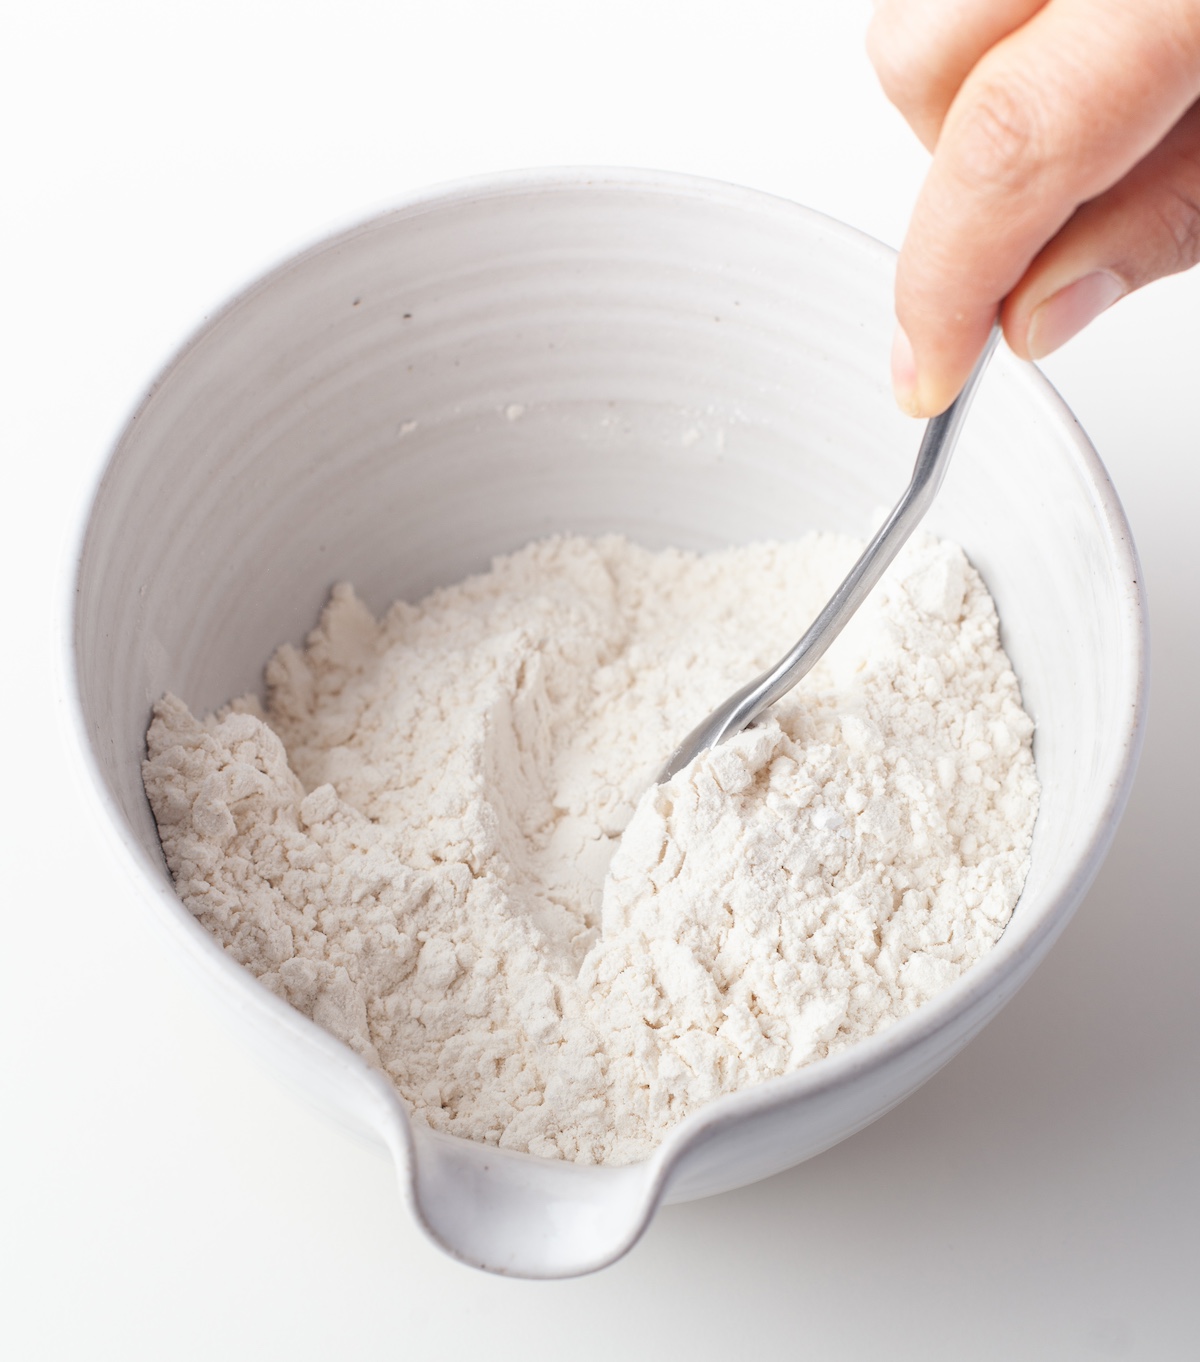 Whisking together dry ingredients in a ceramic bowl